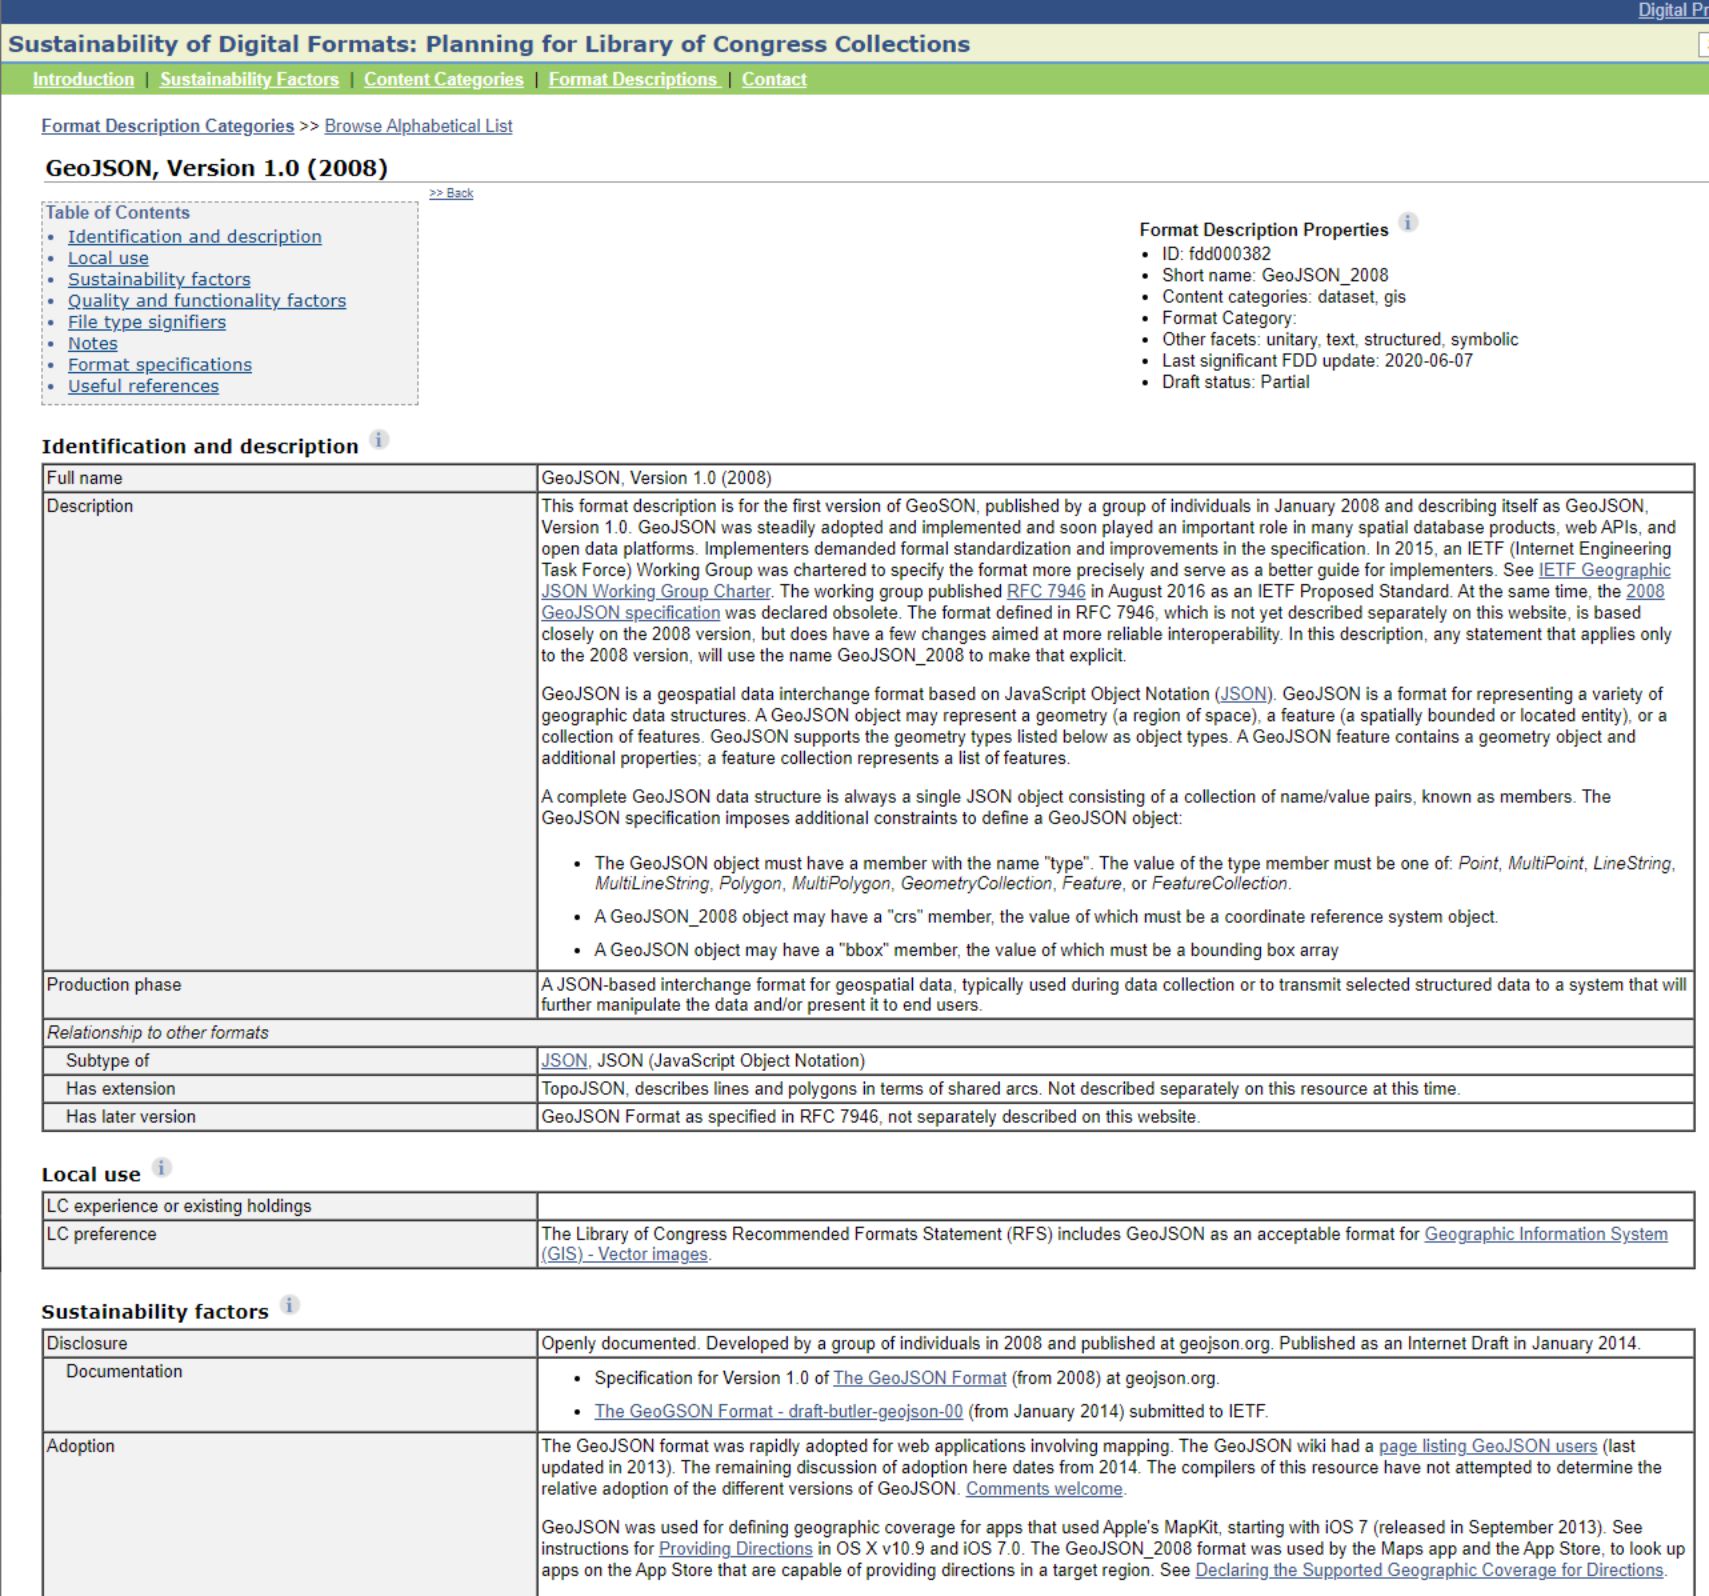 Screenshot of the Library of Congress documentation for the GeoJSON spatial data format.